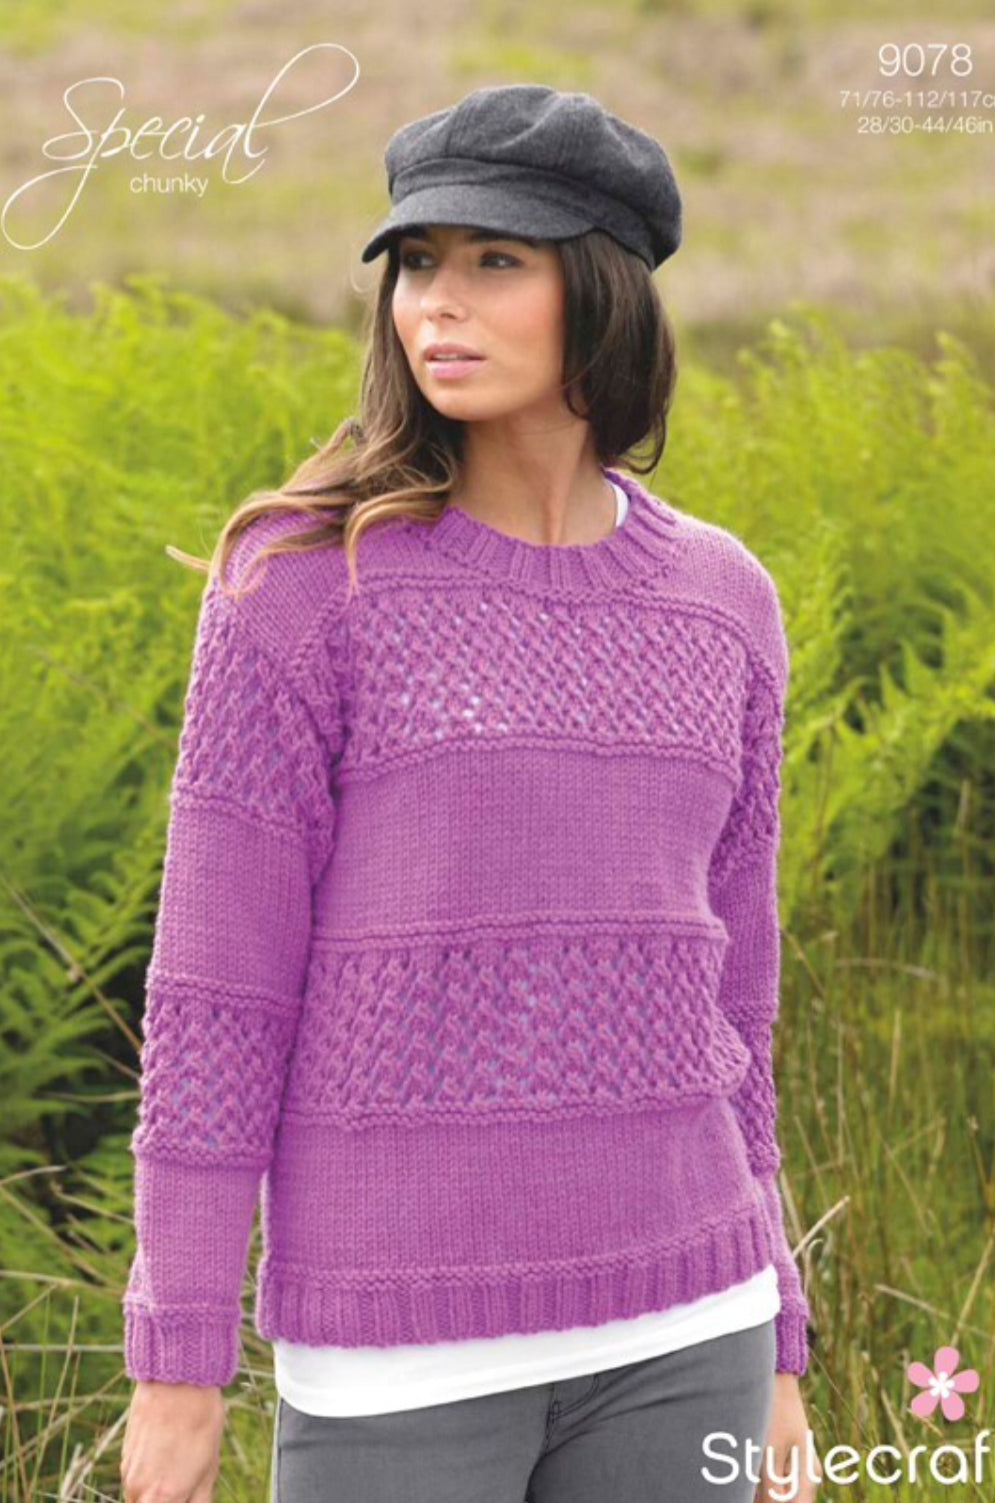 Stylecraft 9078 Womens Sweater in Special Chunky